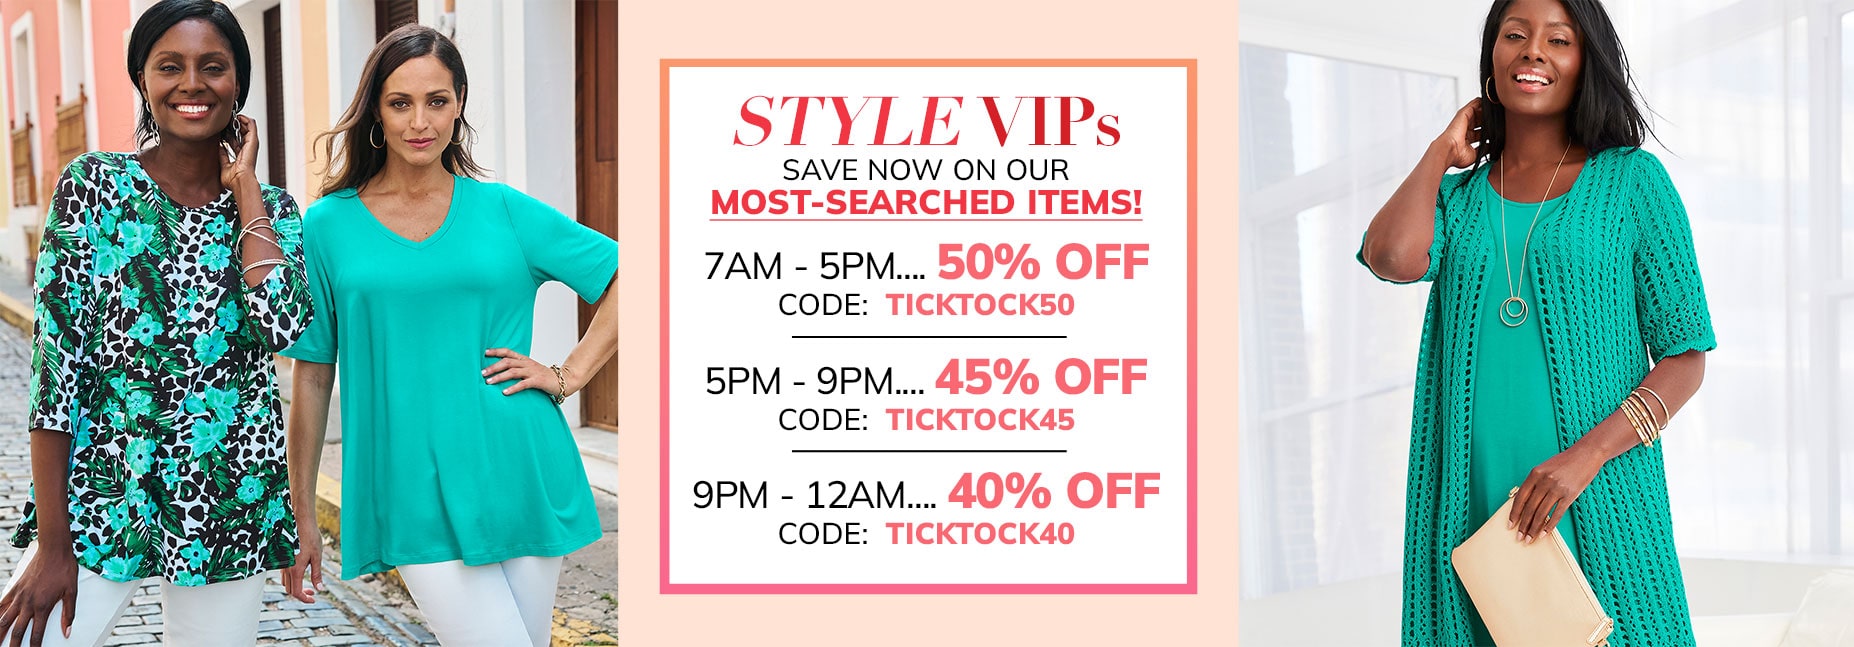 CLICK HERE TO GET DISCOUNTS OVER THE MOST SEARCHED ITEMS!